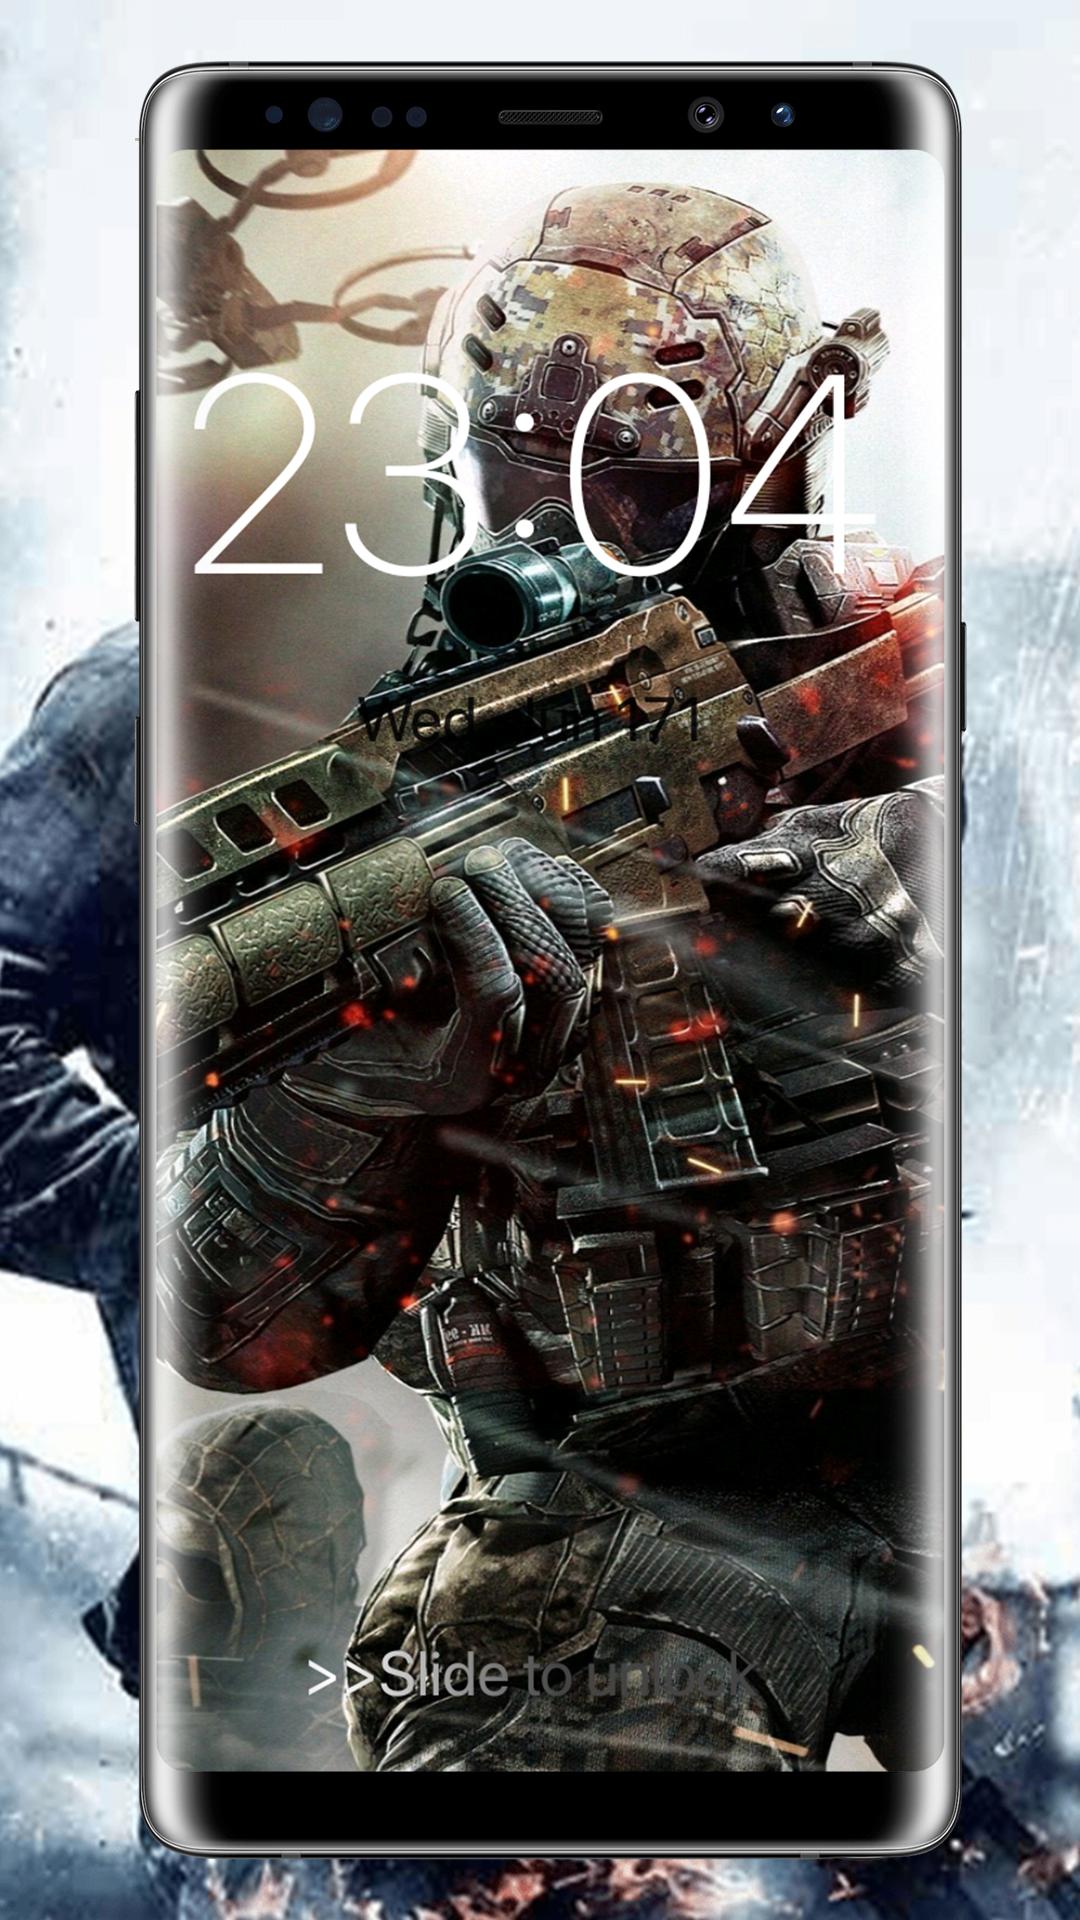 Call Duty Black 4 Lock Screen Wallpapers Hd For Android